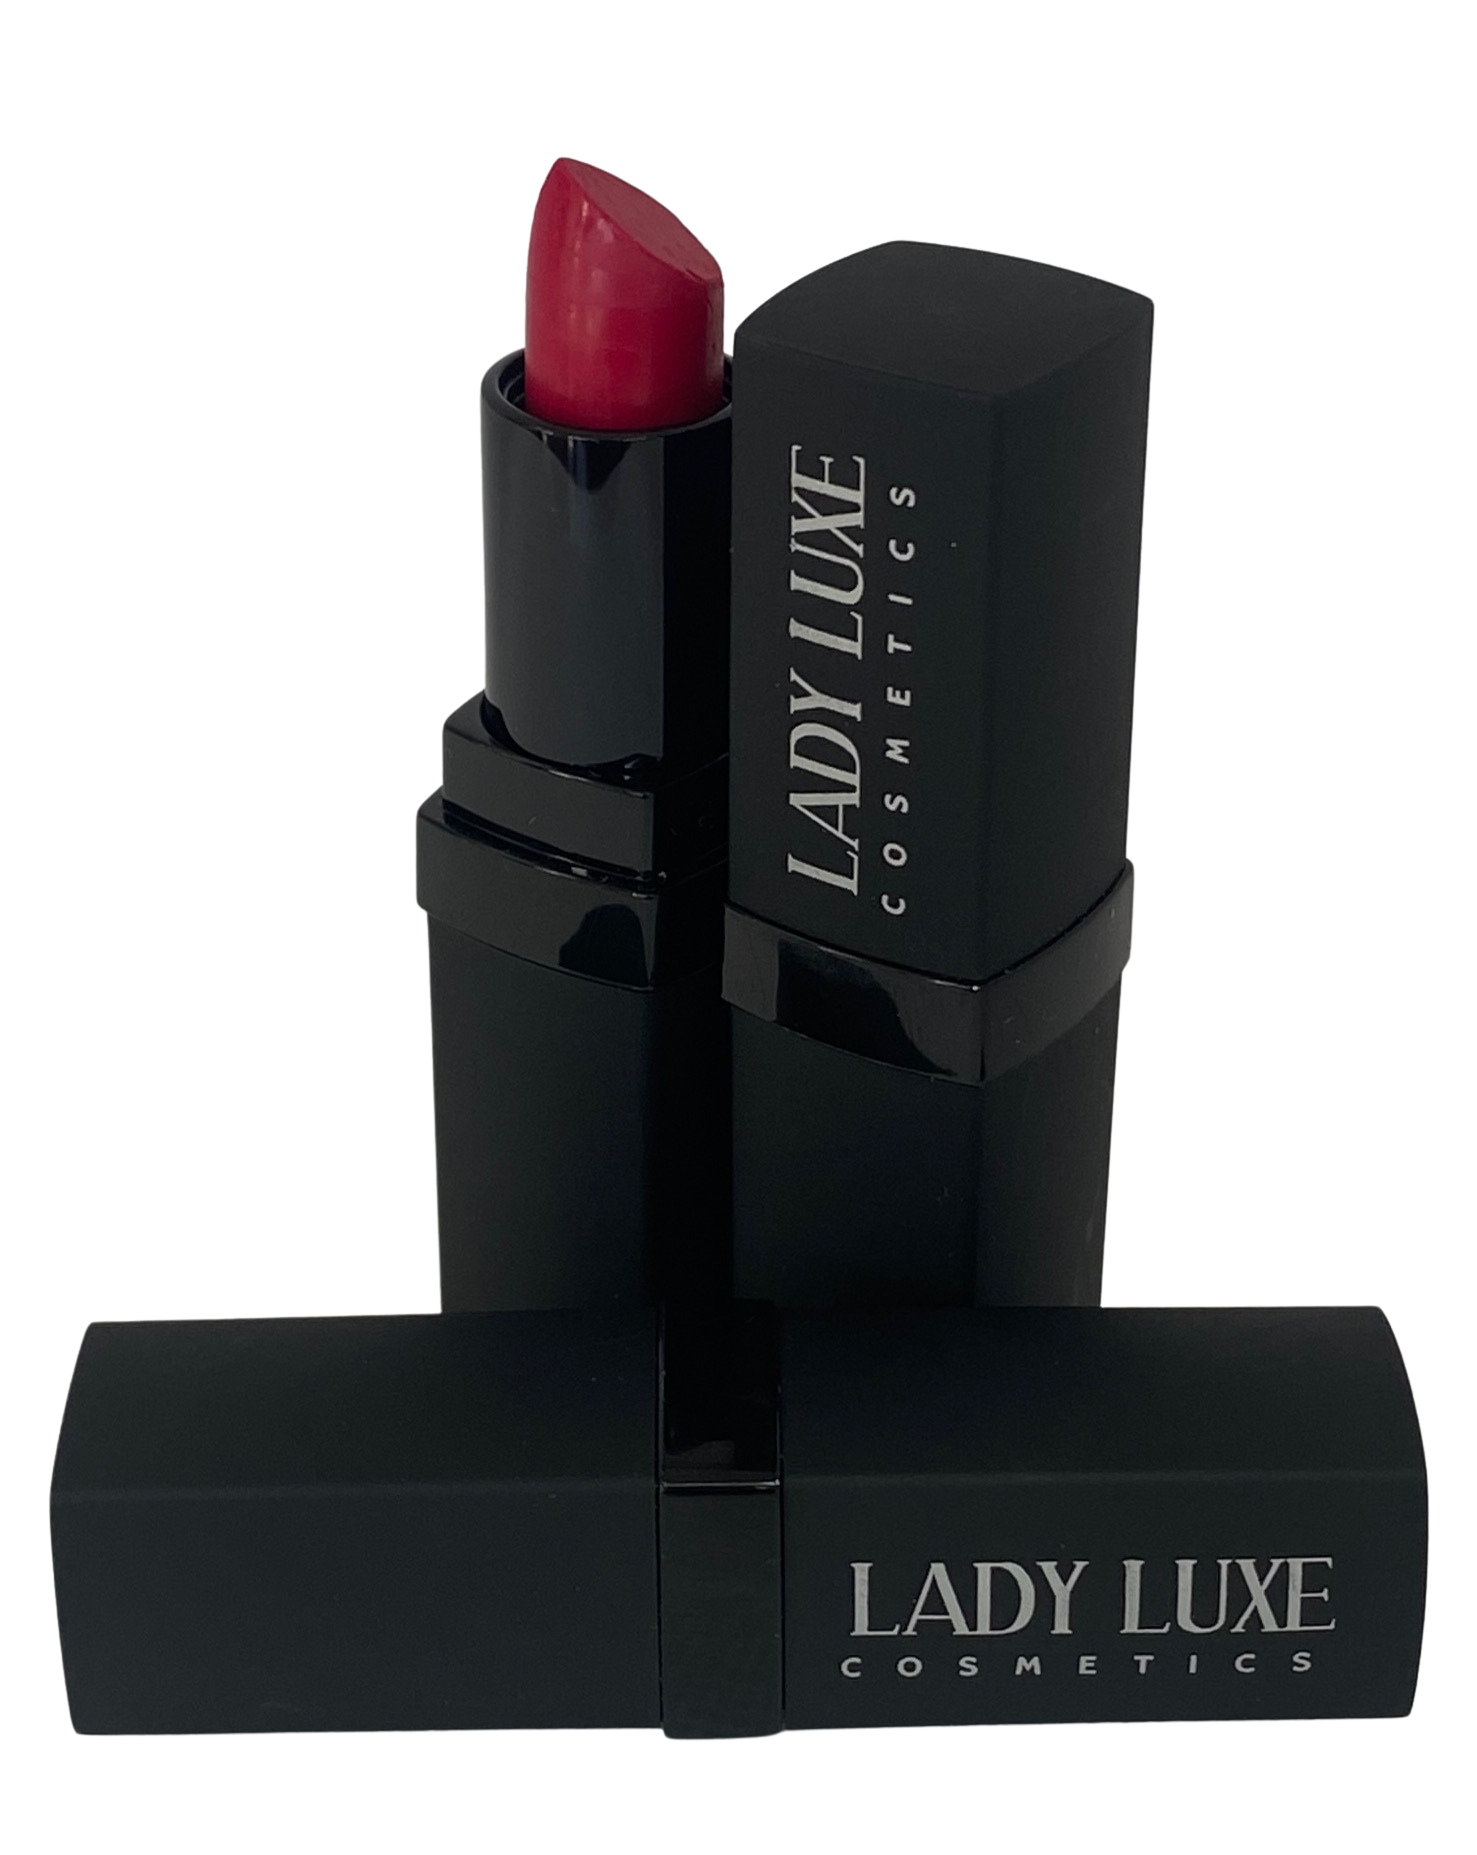 Products – Lady Luxe